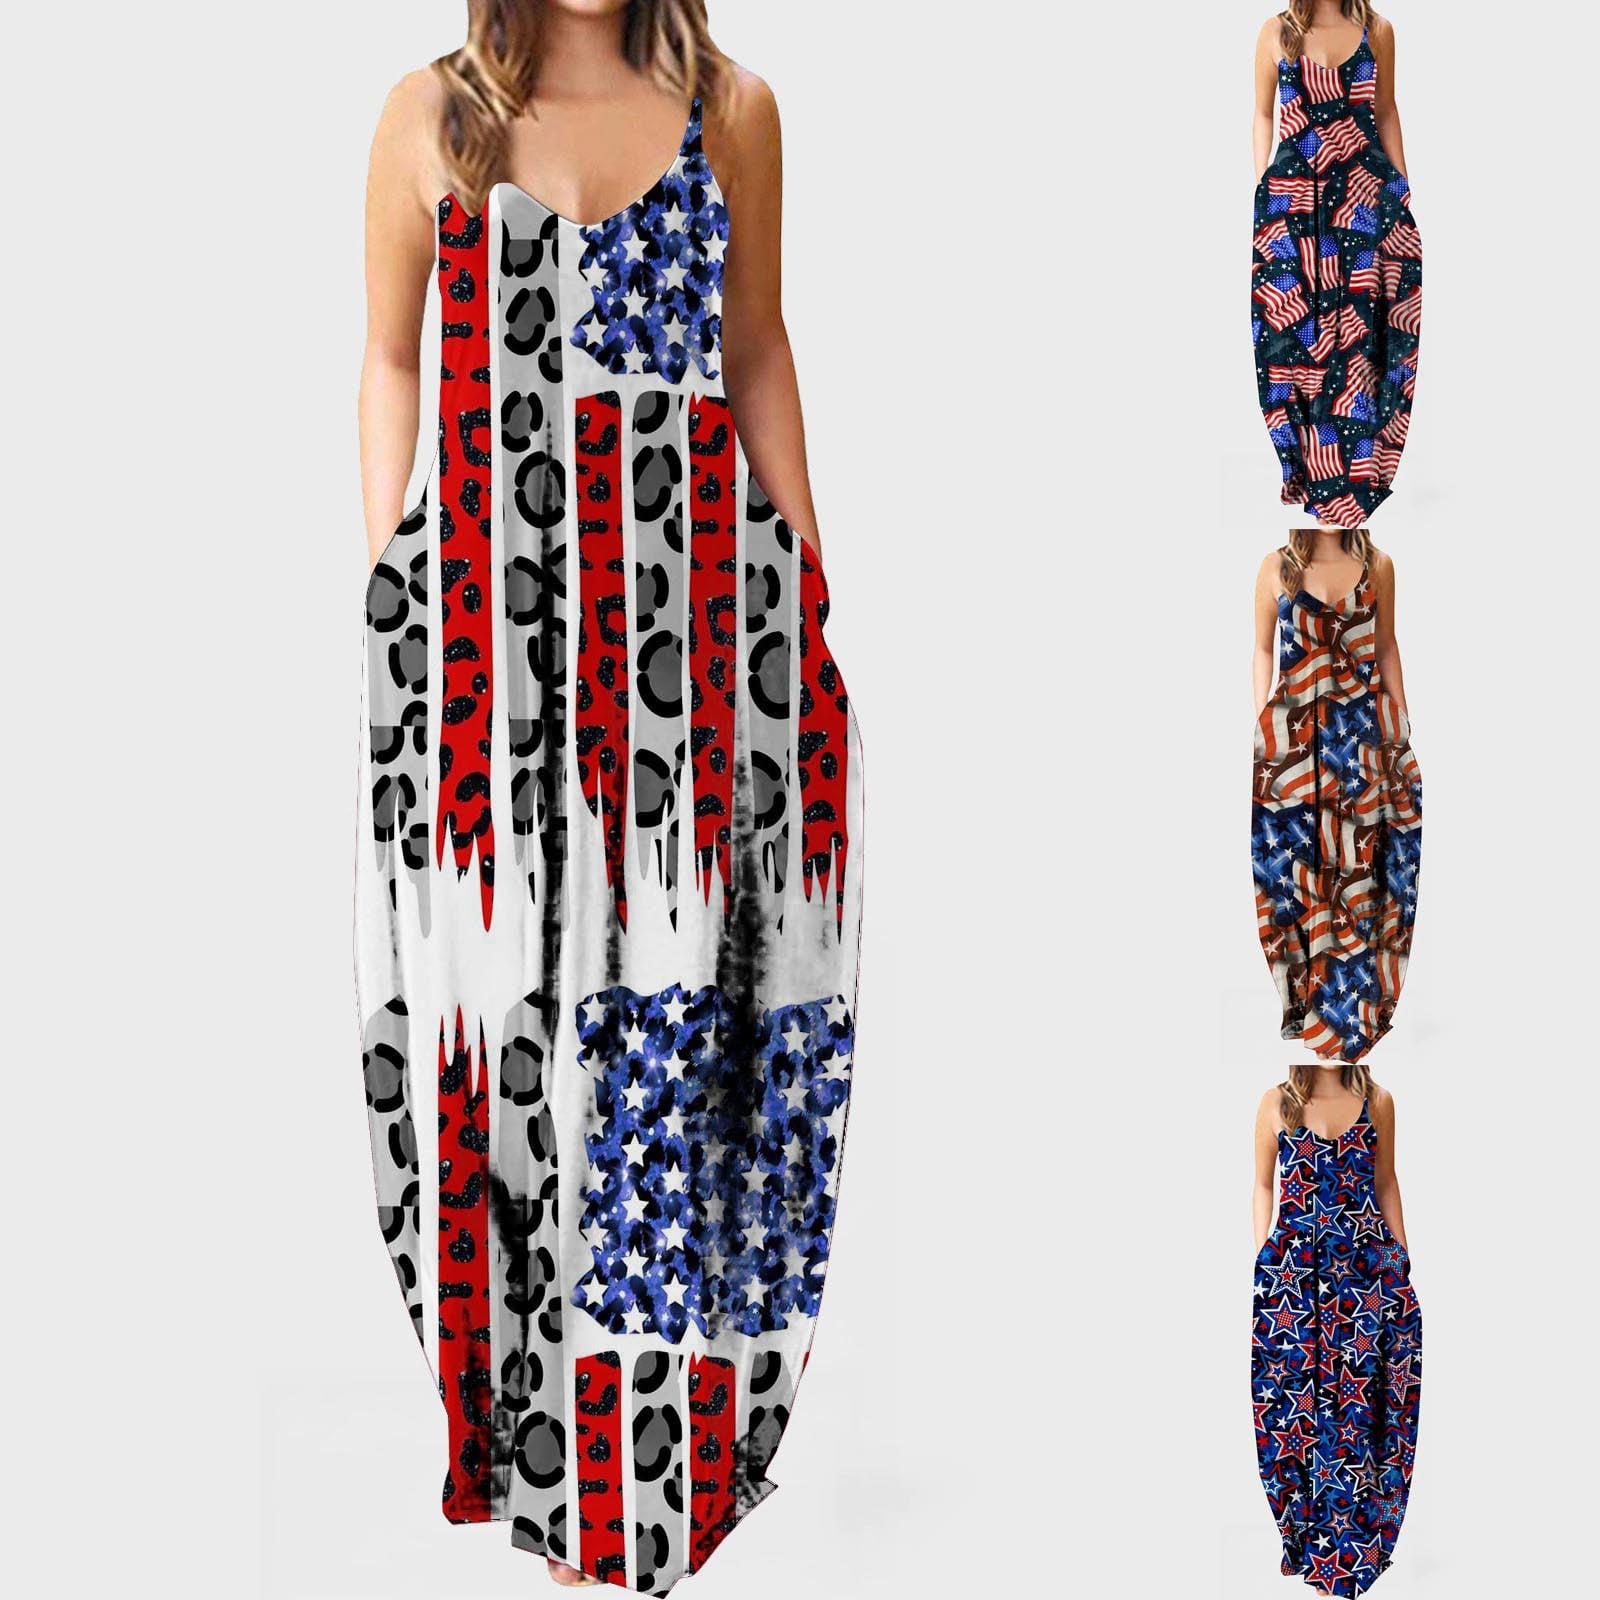 Women's 4th of July Maxi Dresses with Pockets Summer Sexy Spaghetti ...